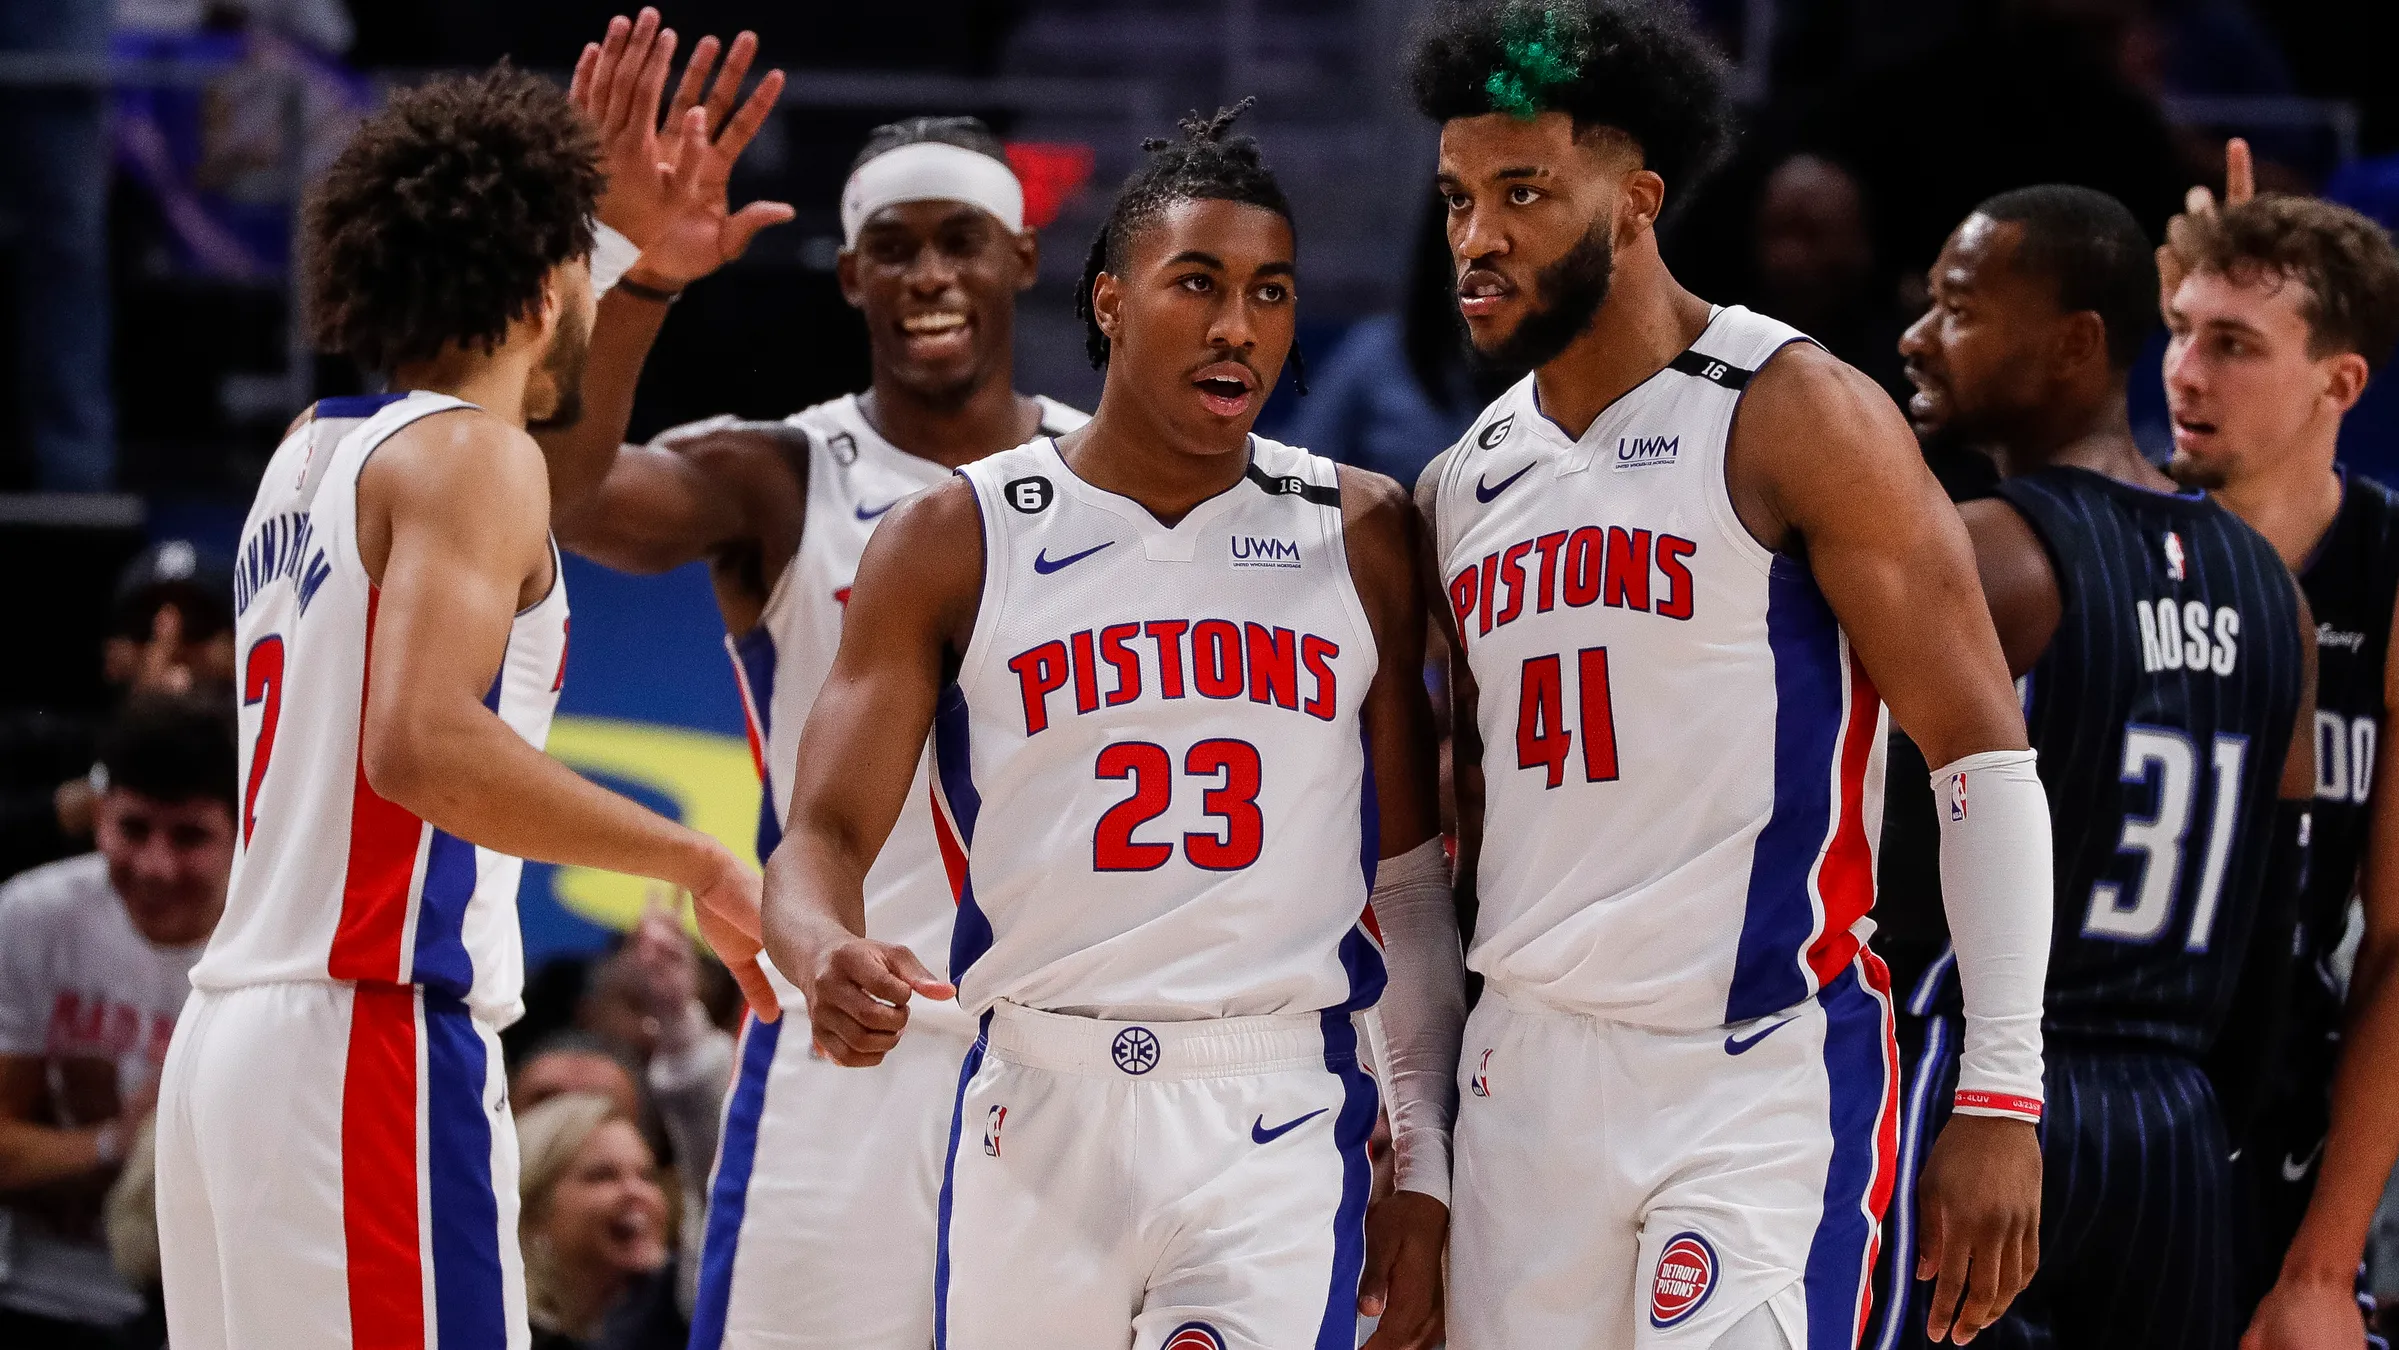 Struggling Pistons How Detroit's Young Team Faces Uphill Battle in NBA's Tough Eastern Conference